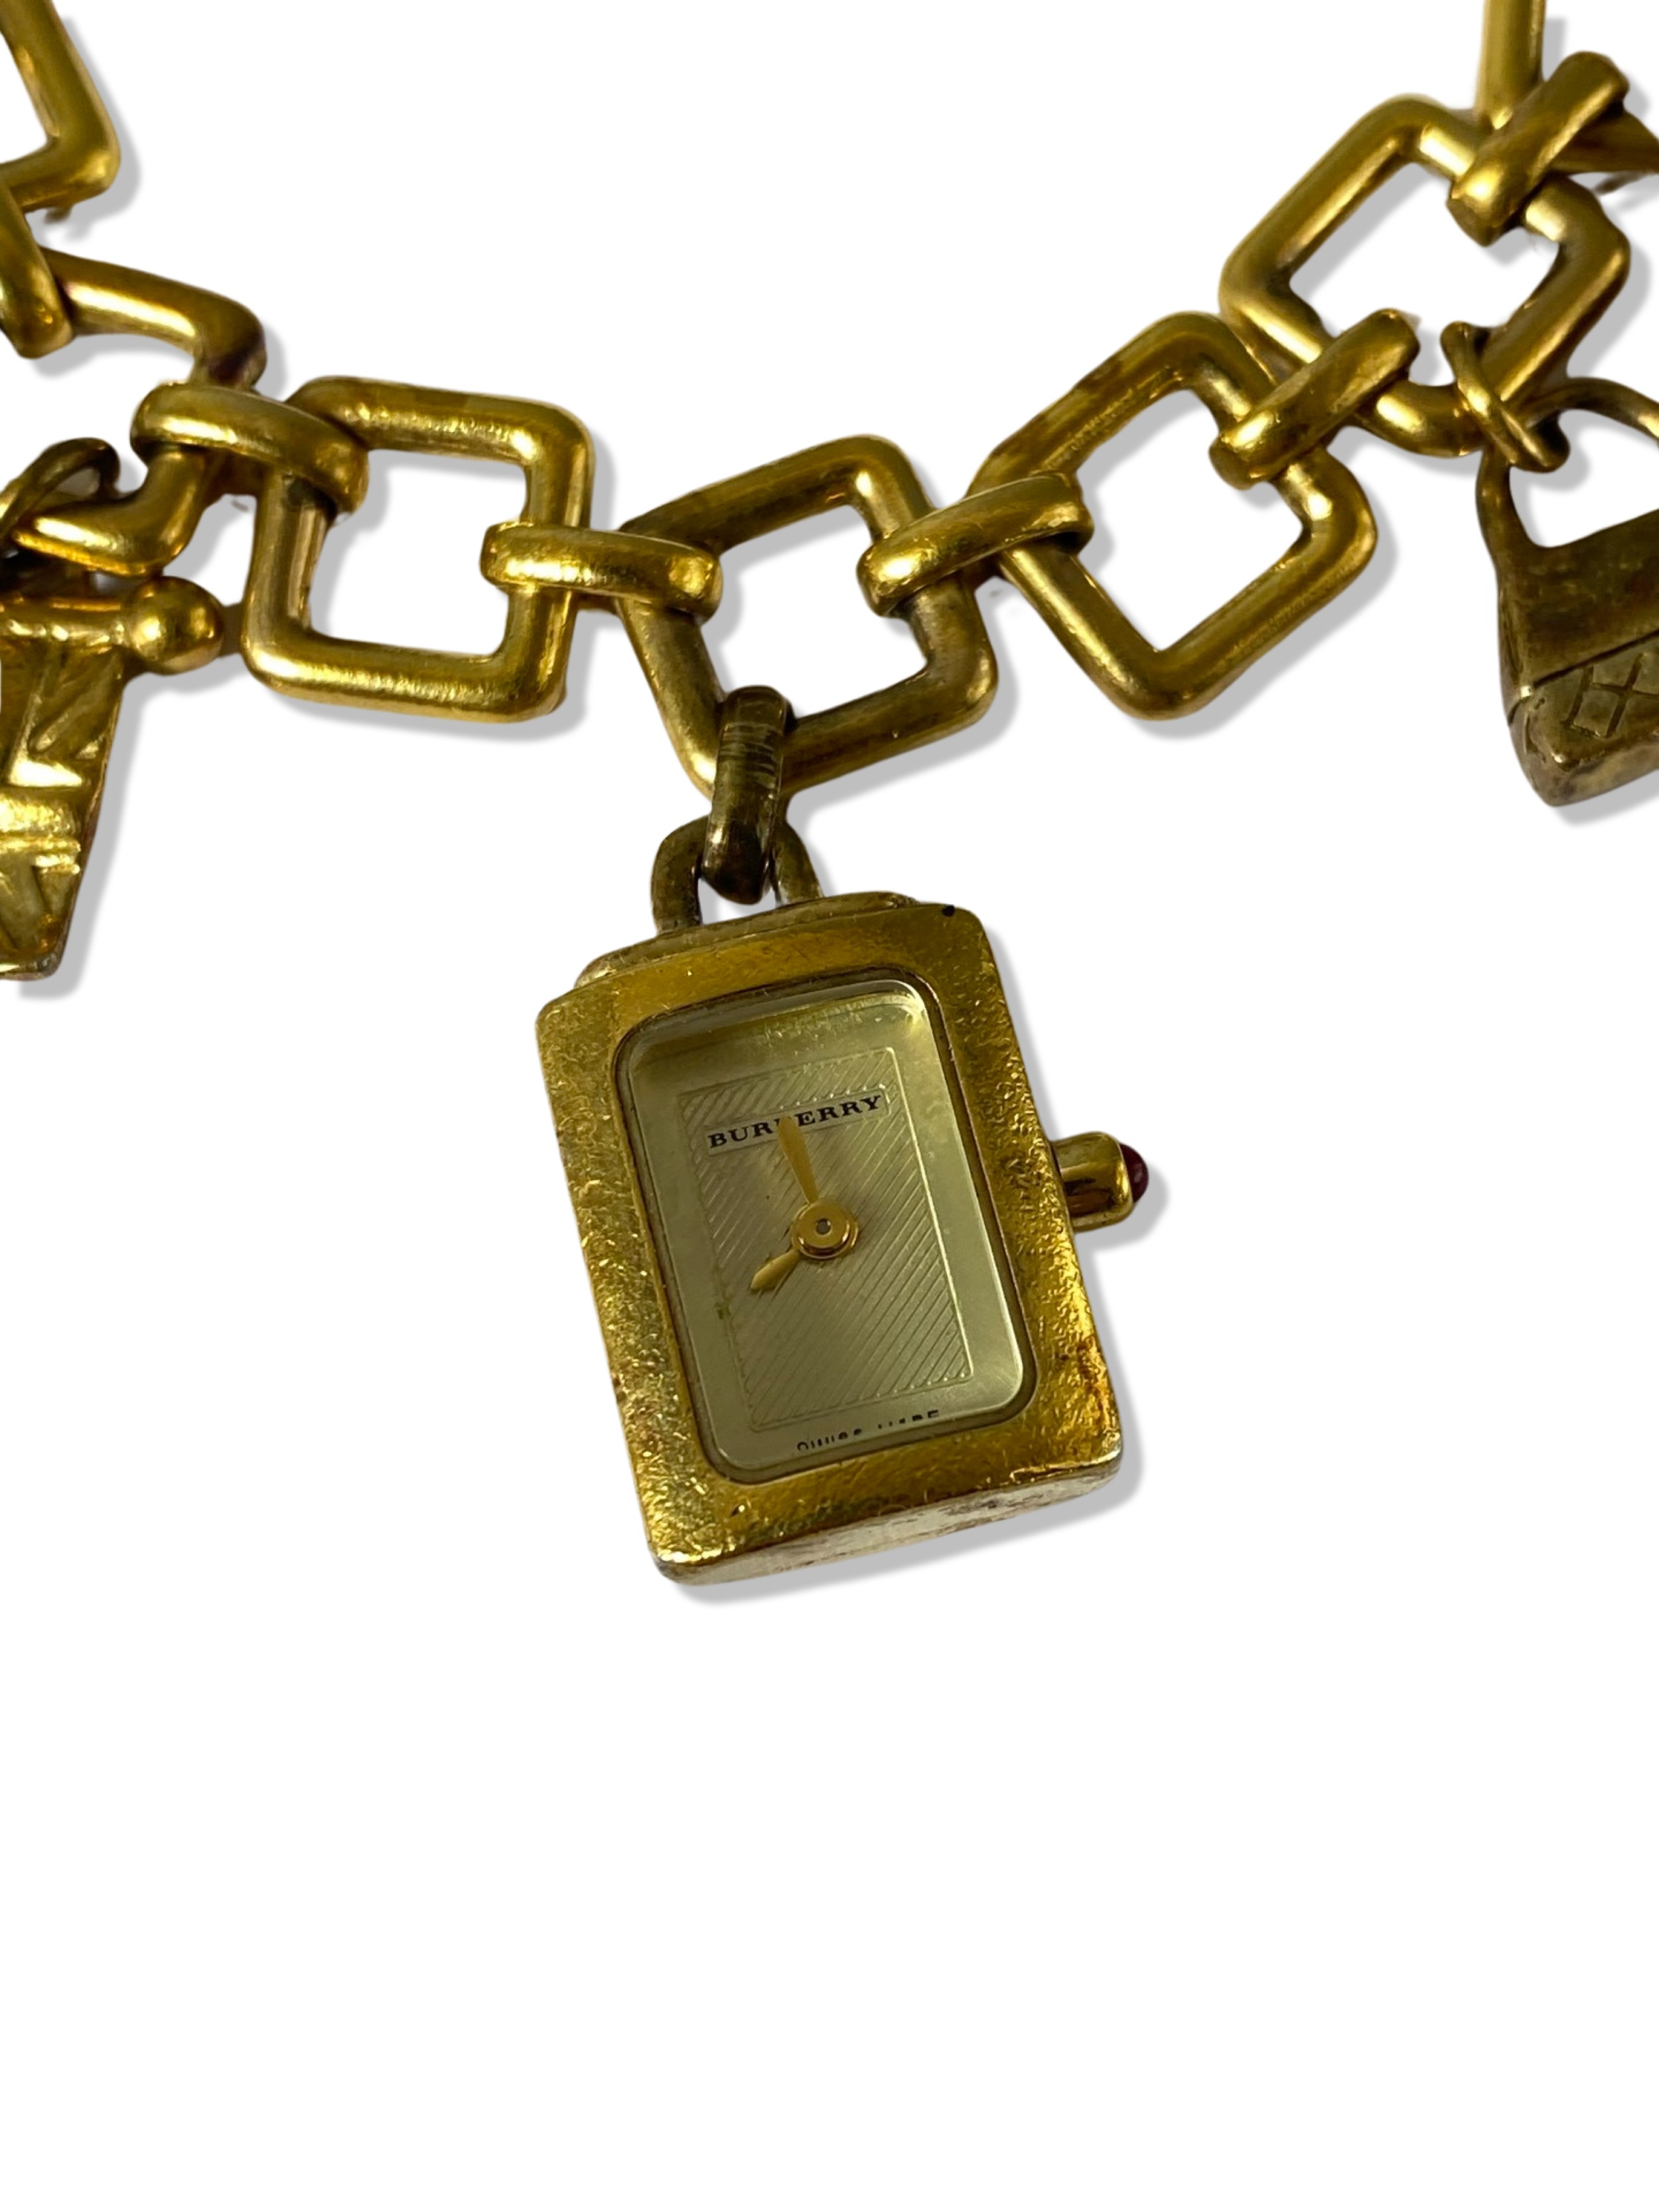 Burberry silver gold tone charm bracelet which includes a working watch charm, weighing 63.03 - Image 2 of 3